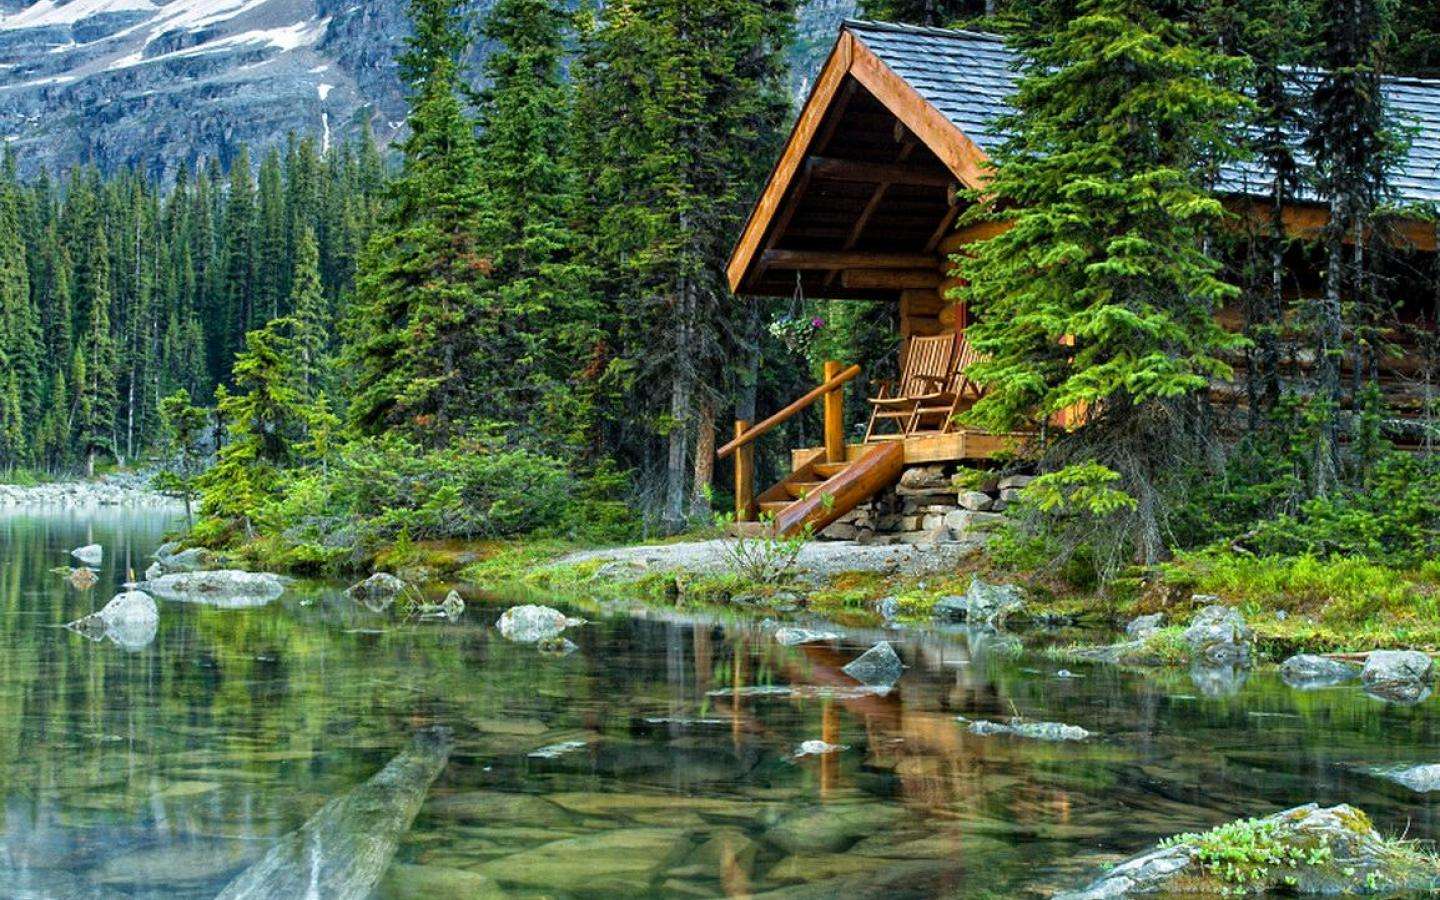 A Cabin in the Mountains puzzle online from photo